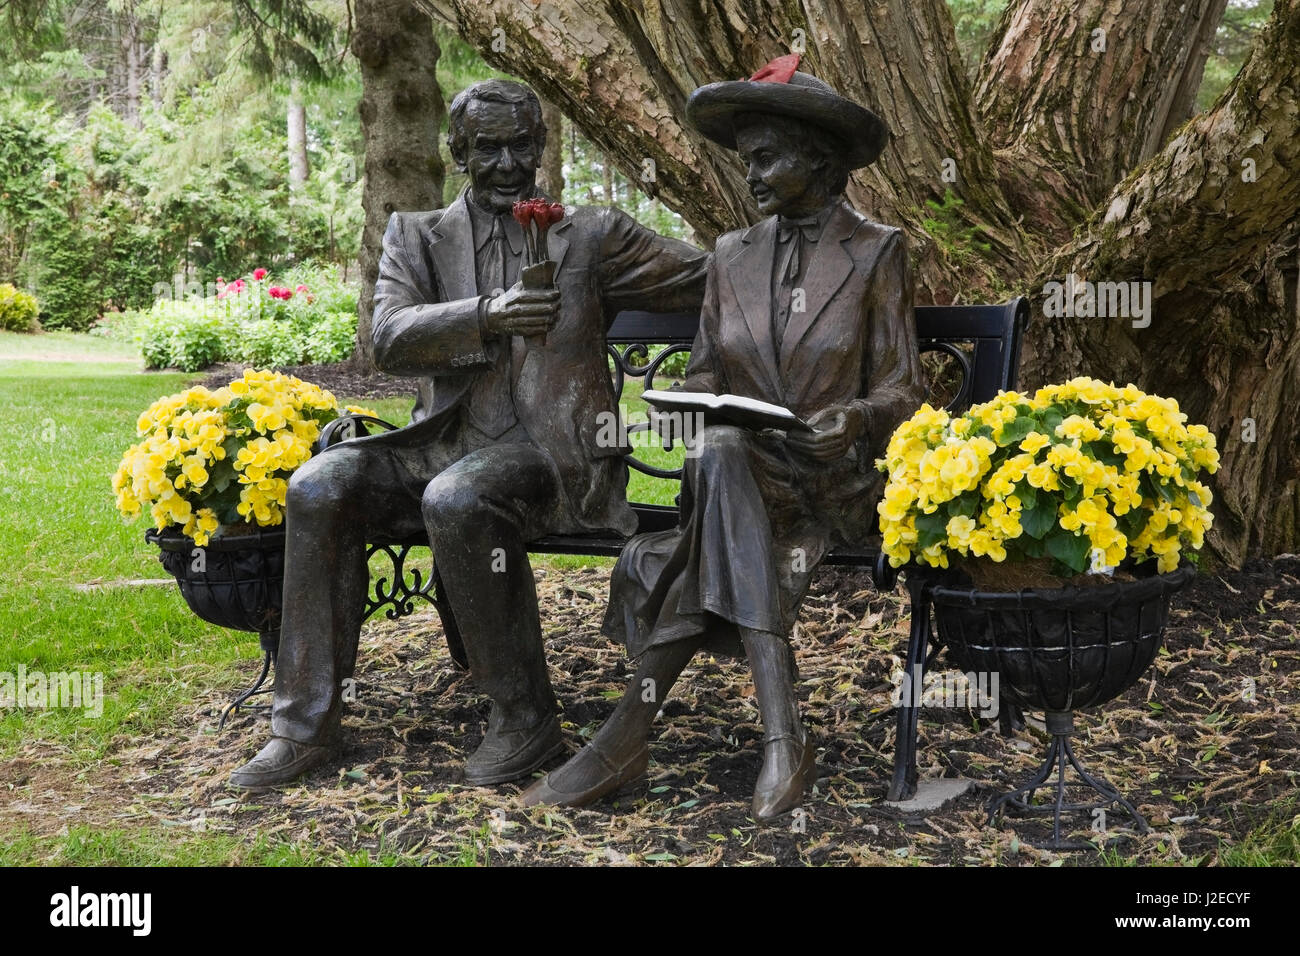 Bronze metal statue of a elderly couple seated on a bench beneath a Salix - Willow Tree bordered by yellow Begonias in backyard garden in summer Stock Photo